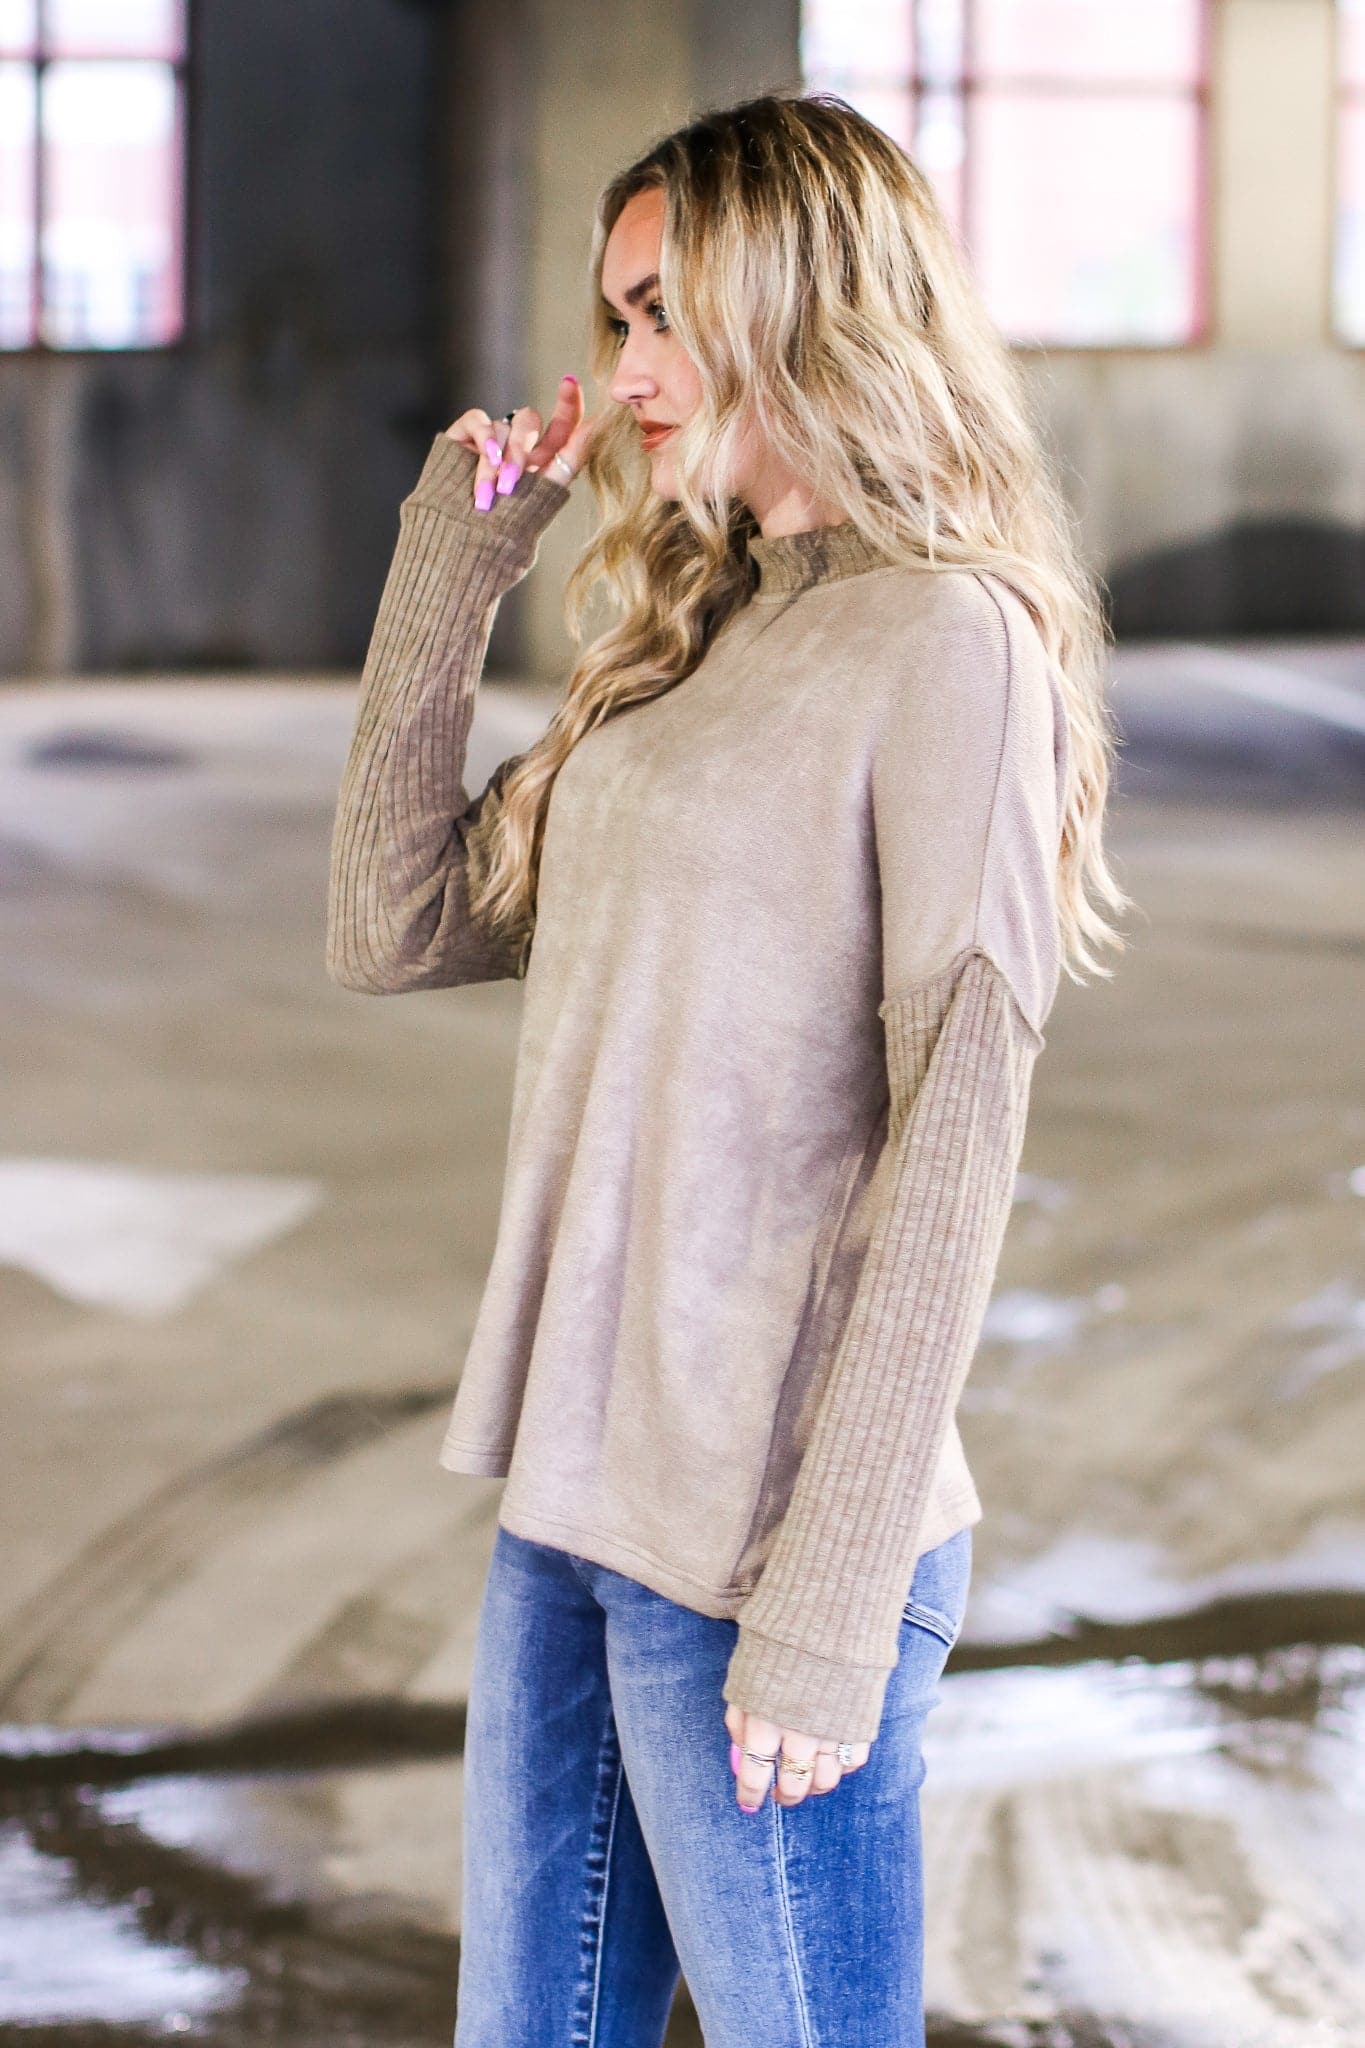  Loving Arms Ribbed Knit Contrast Sweater - FINAL SALE - kitchencabinetmagic